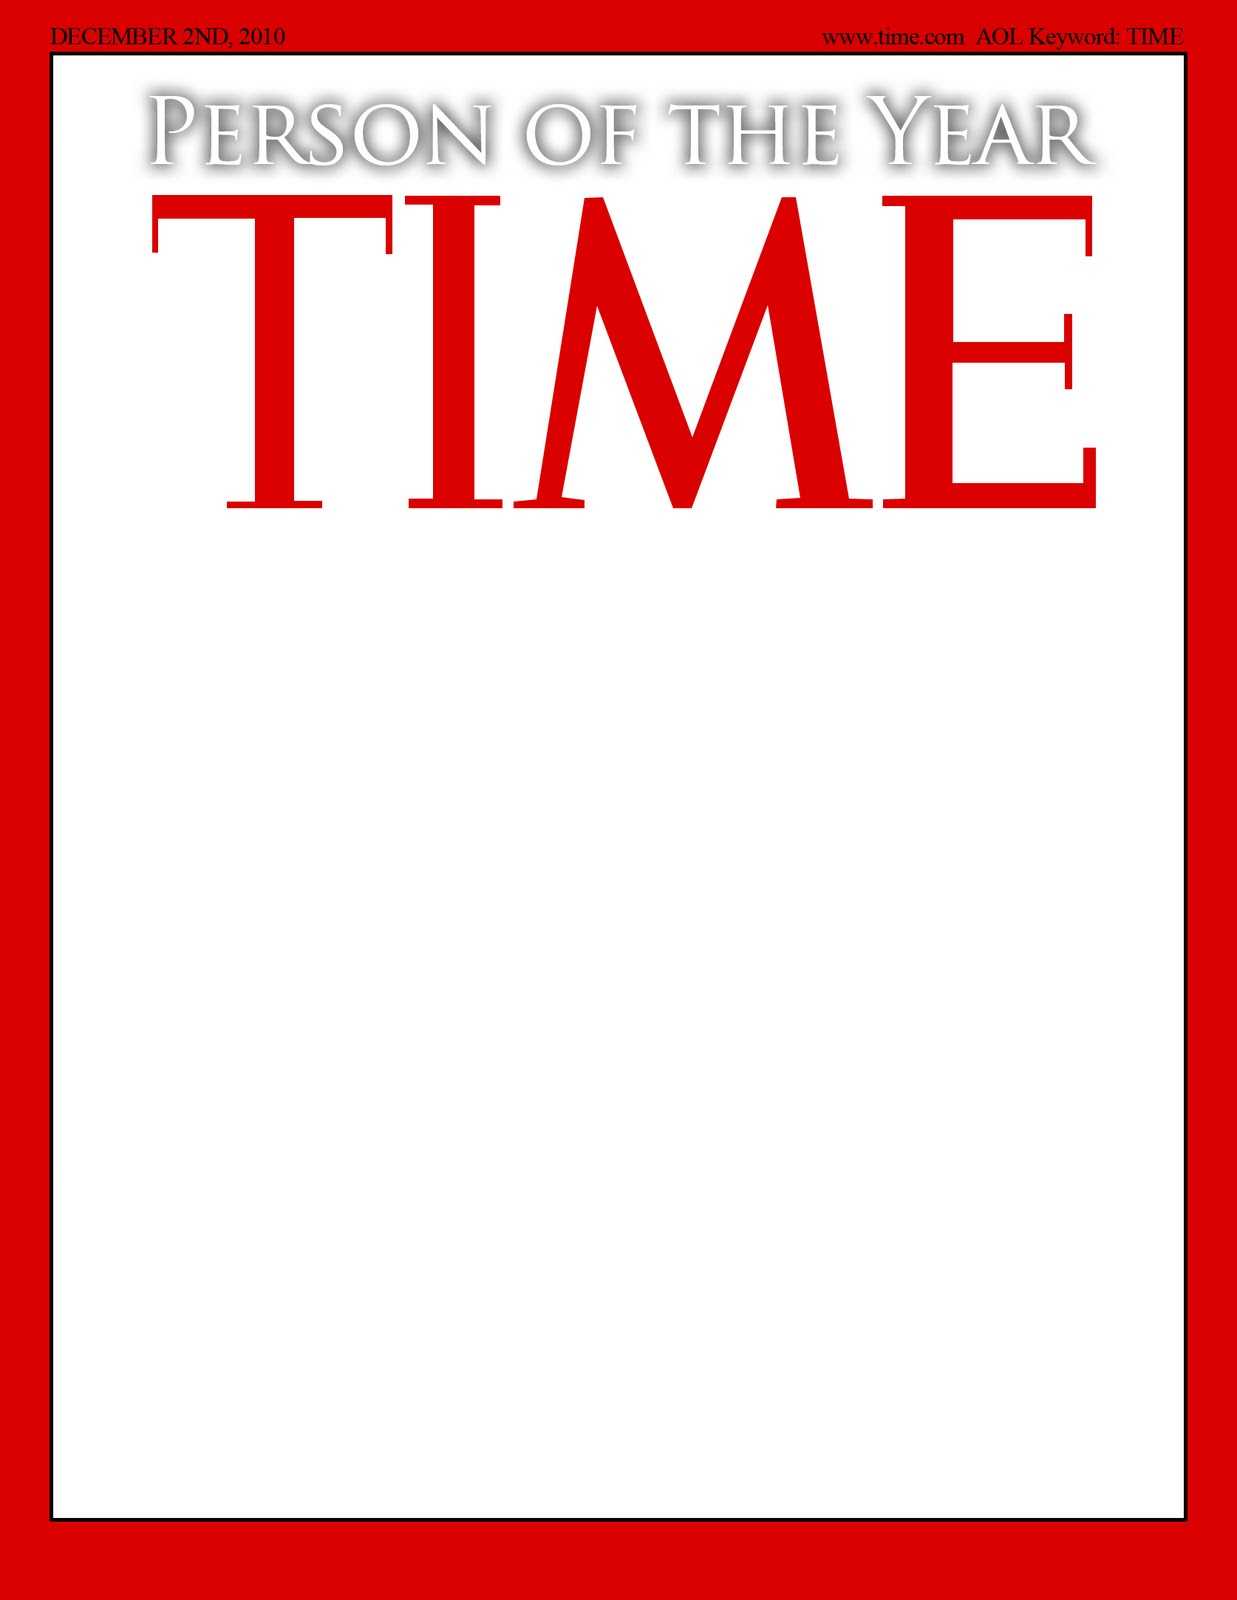 11 Time Magazine Cover Template Psd Images – Time Magazine Regarding Blank Magazine Template Psd